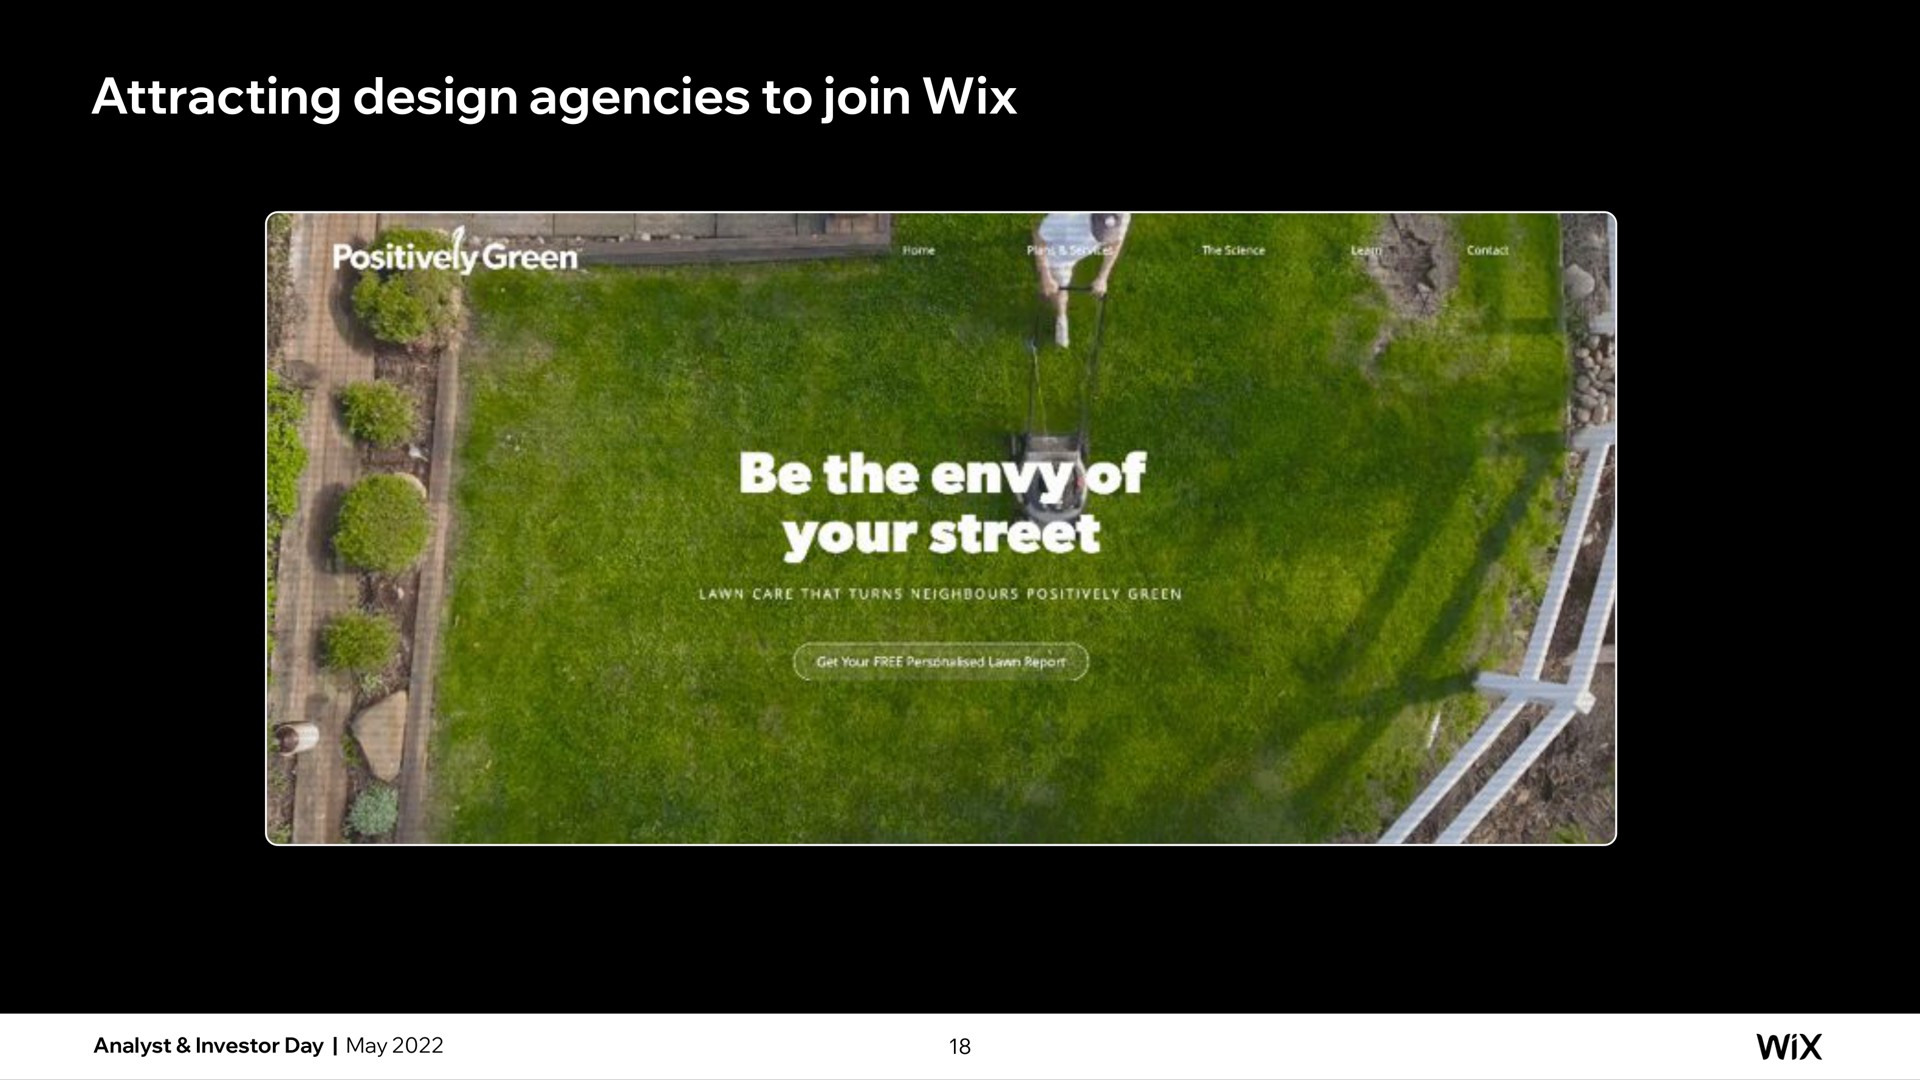 attracting design agencies to join adds your street | Wix